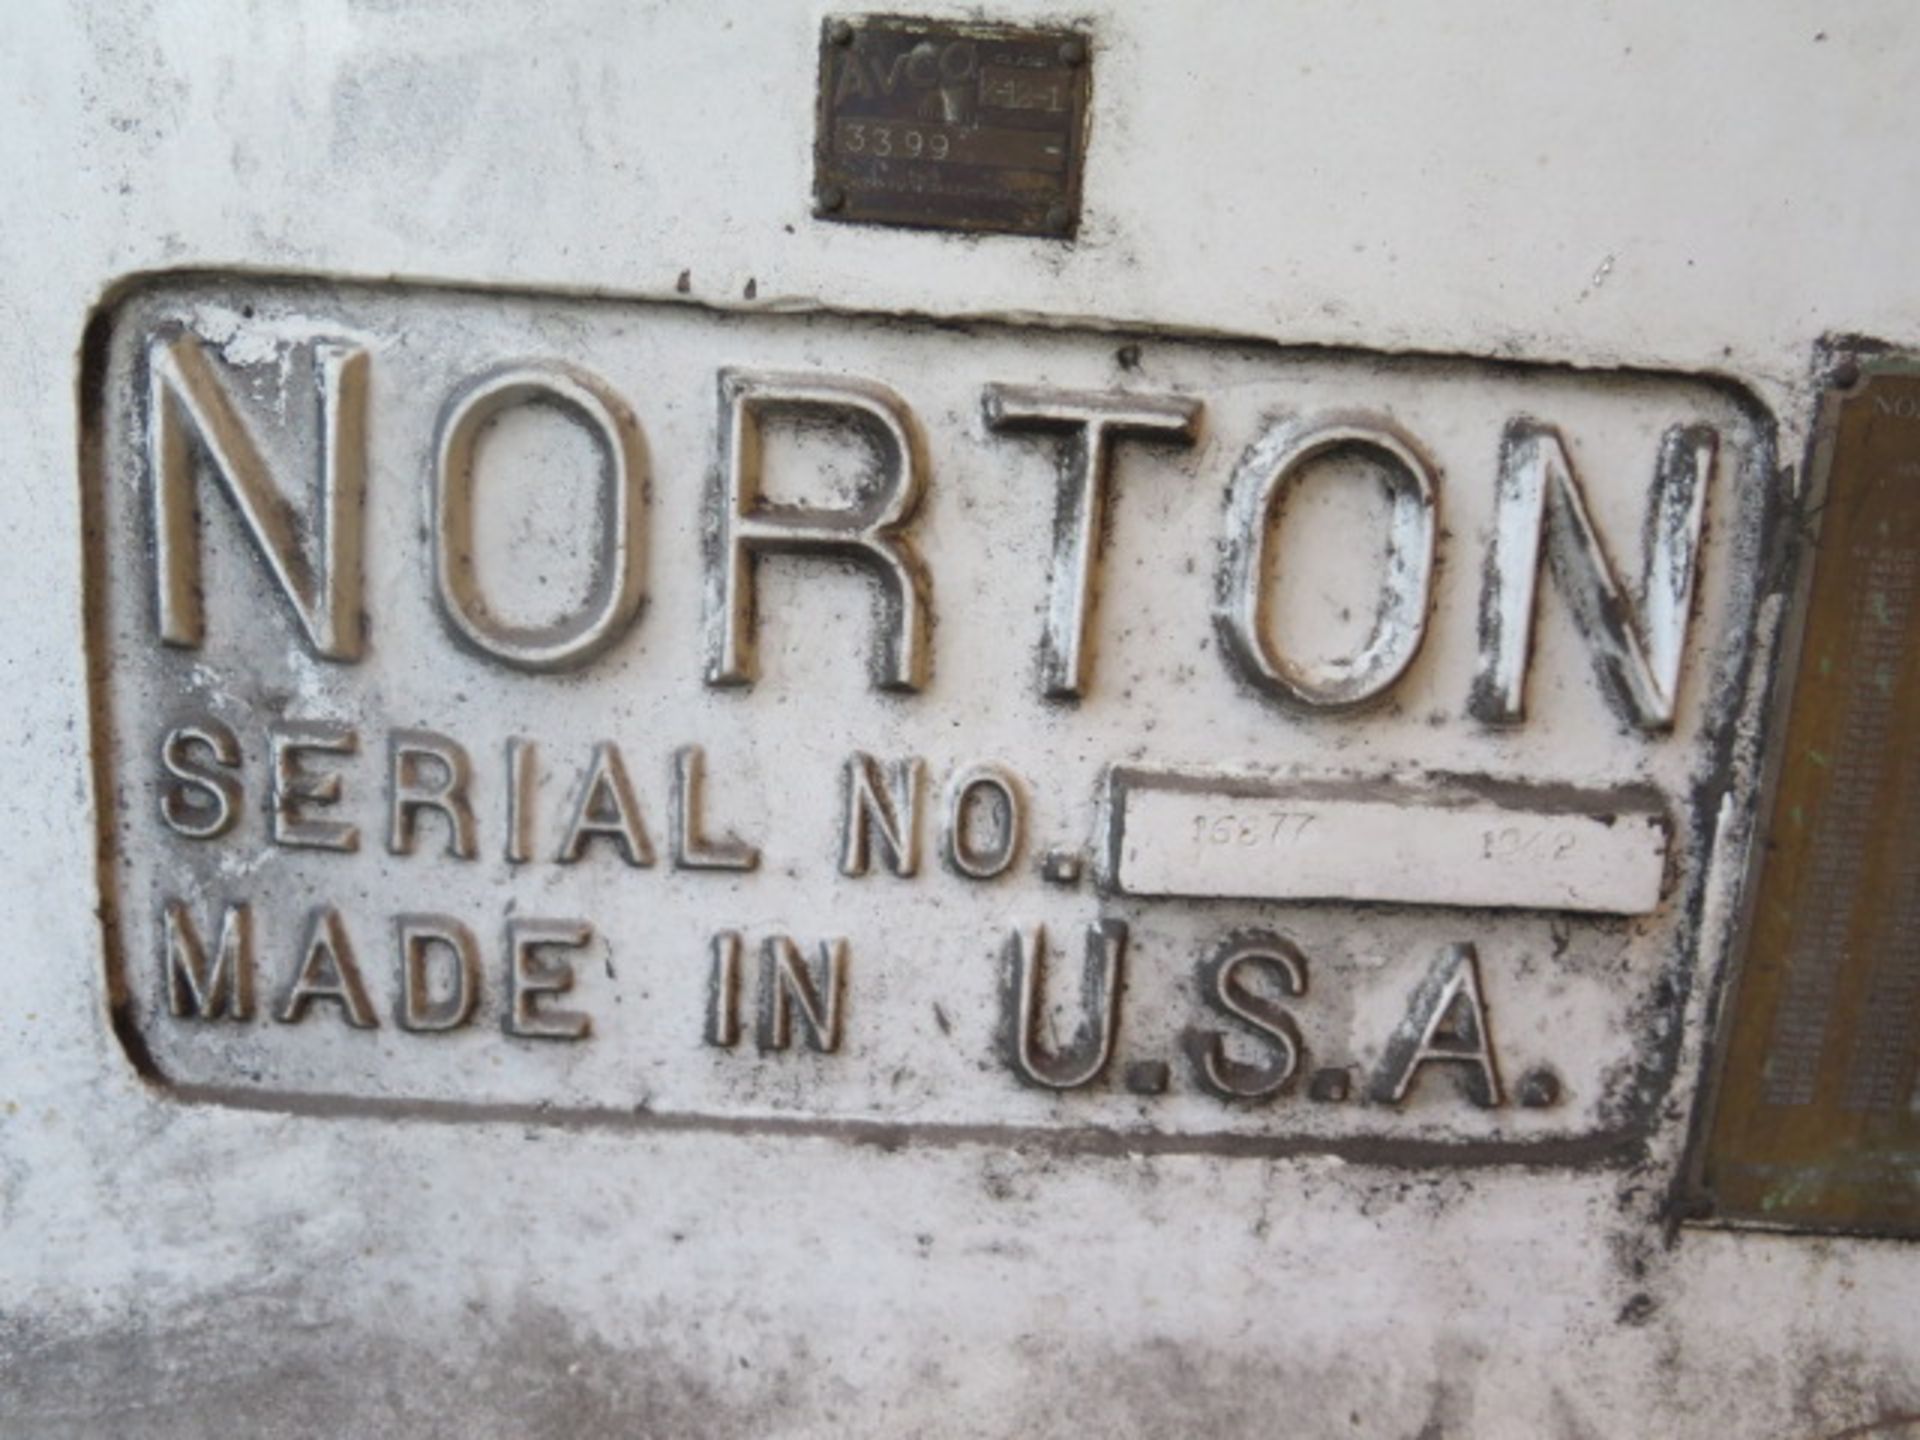 Norton 15” x 72” Cylindrical Grinder s/n 16877 w/ Motorized Work Head, 30” Wheel Cap, SOLD AS IS - Image 11 of 12